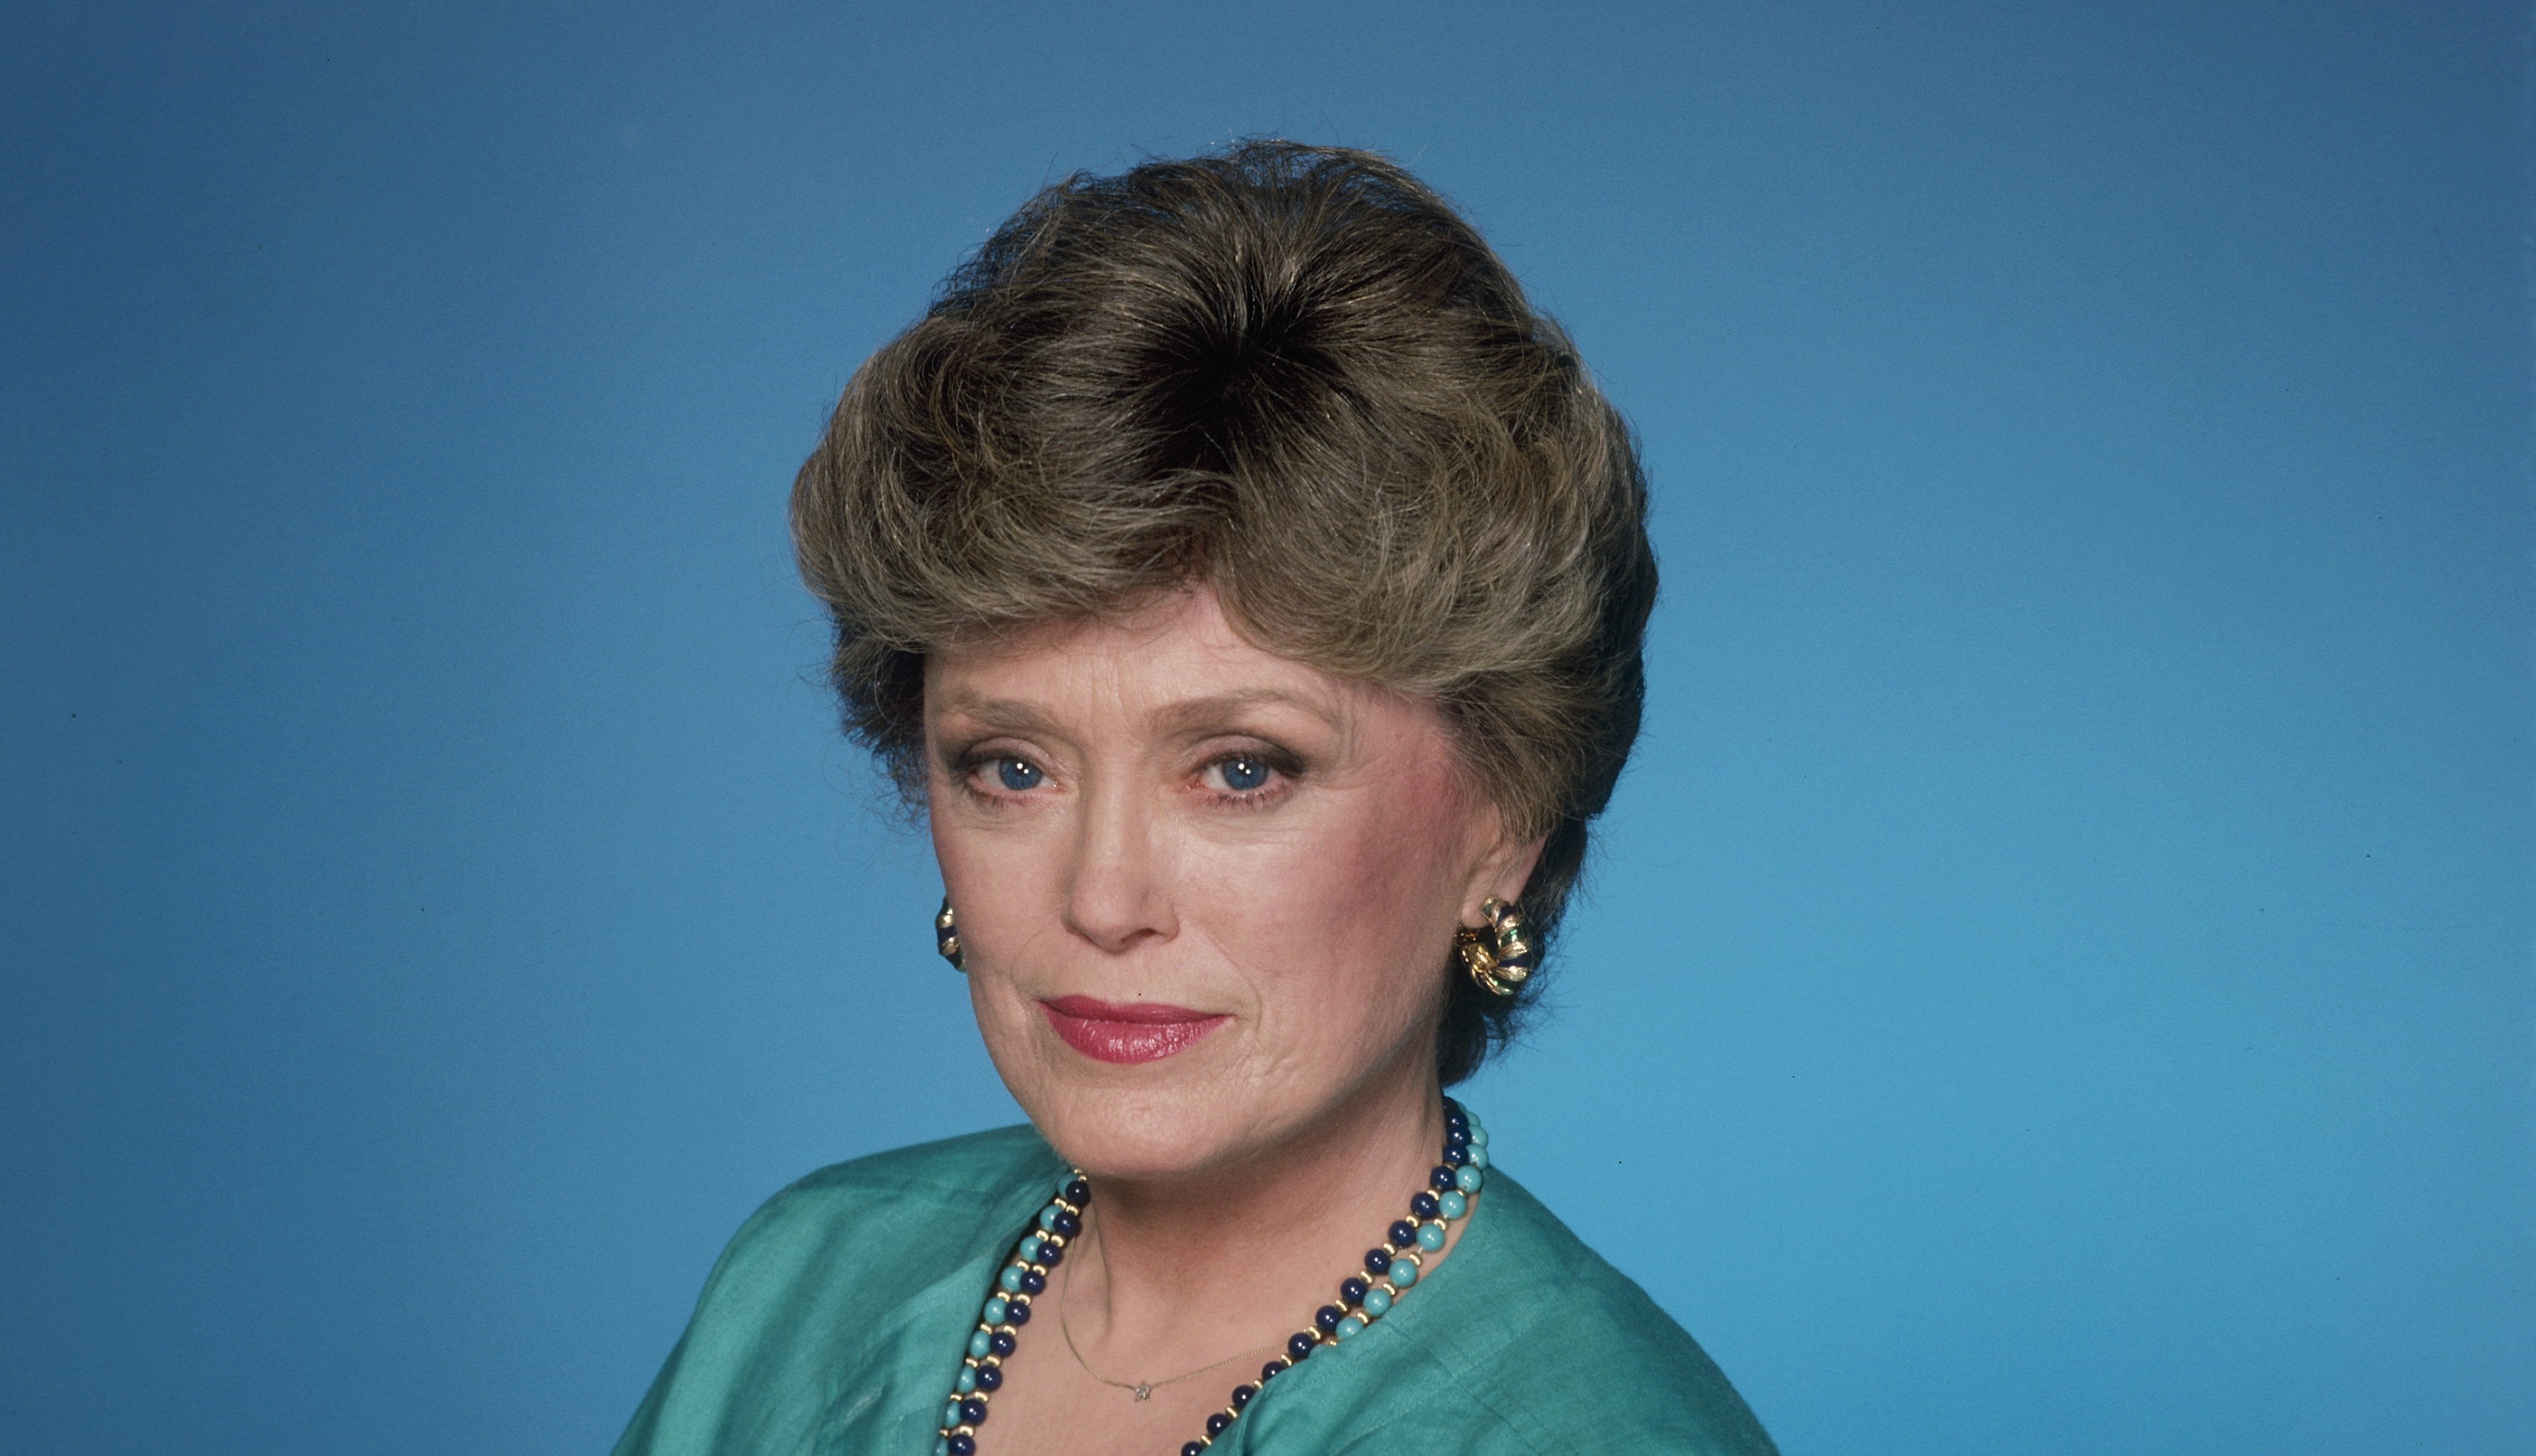 rue mcclanahan suffered 2 kinds of strokes before her death